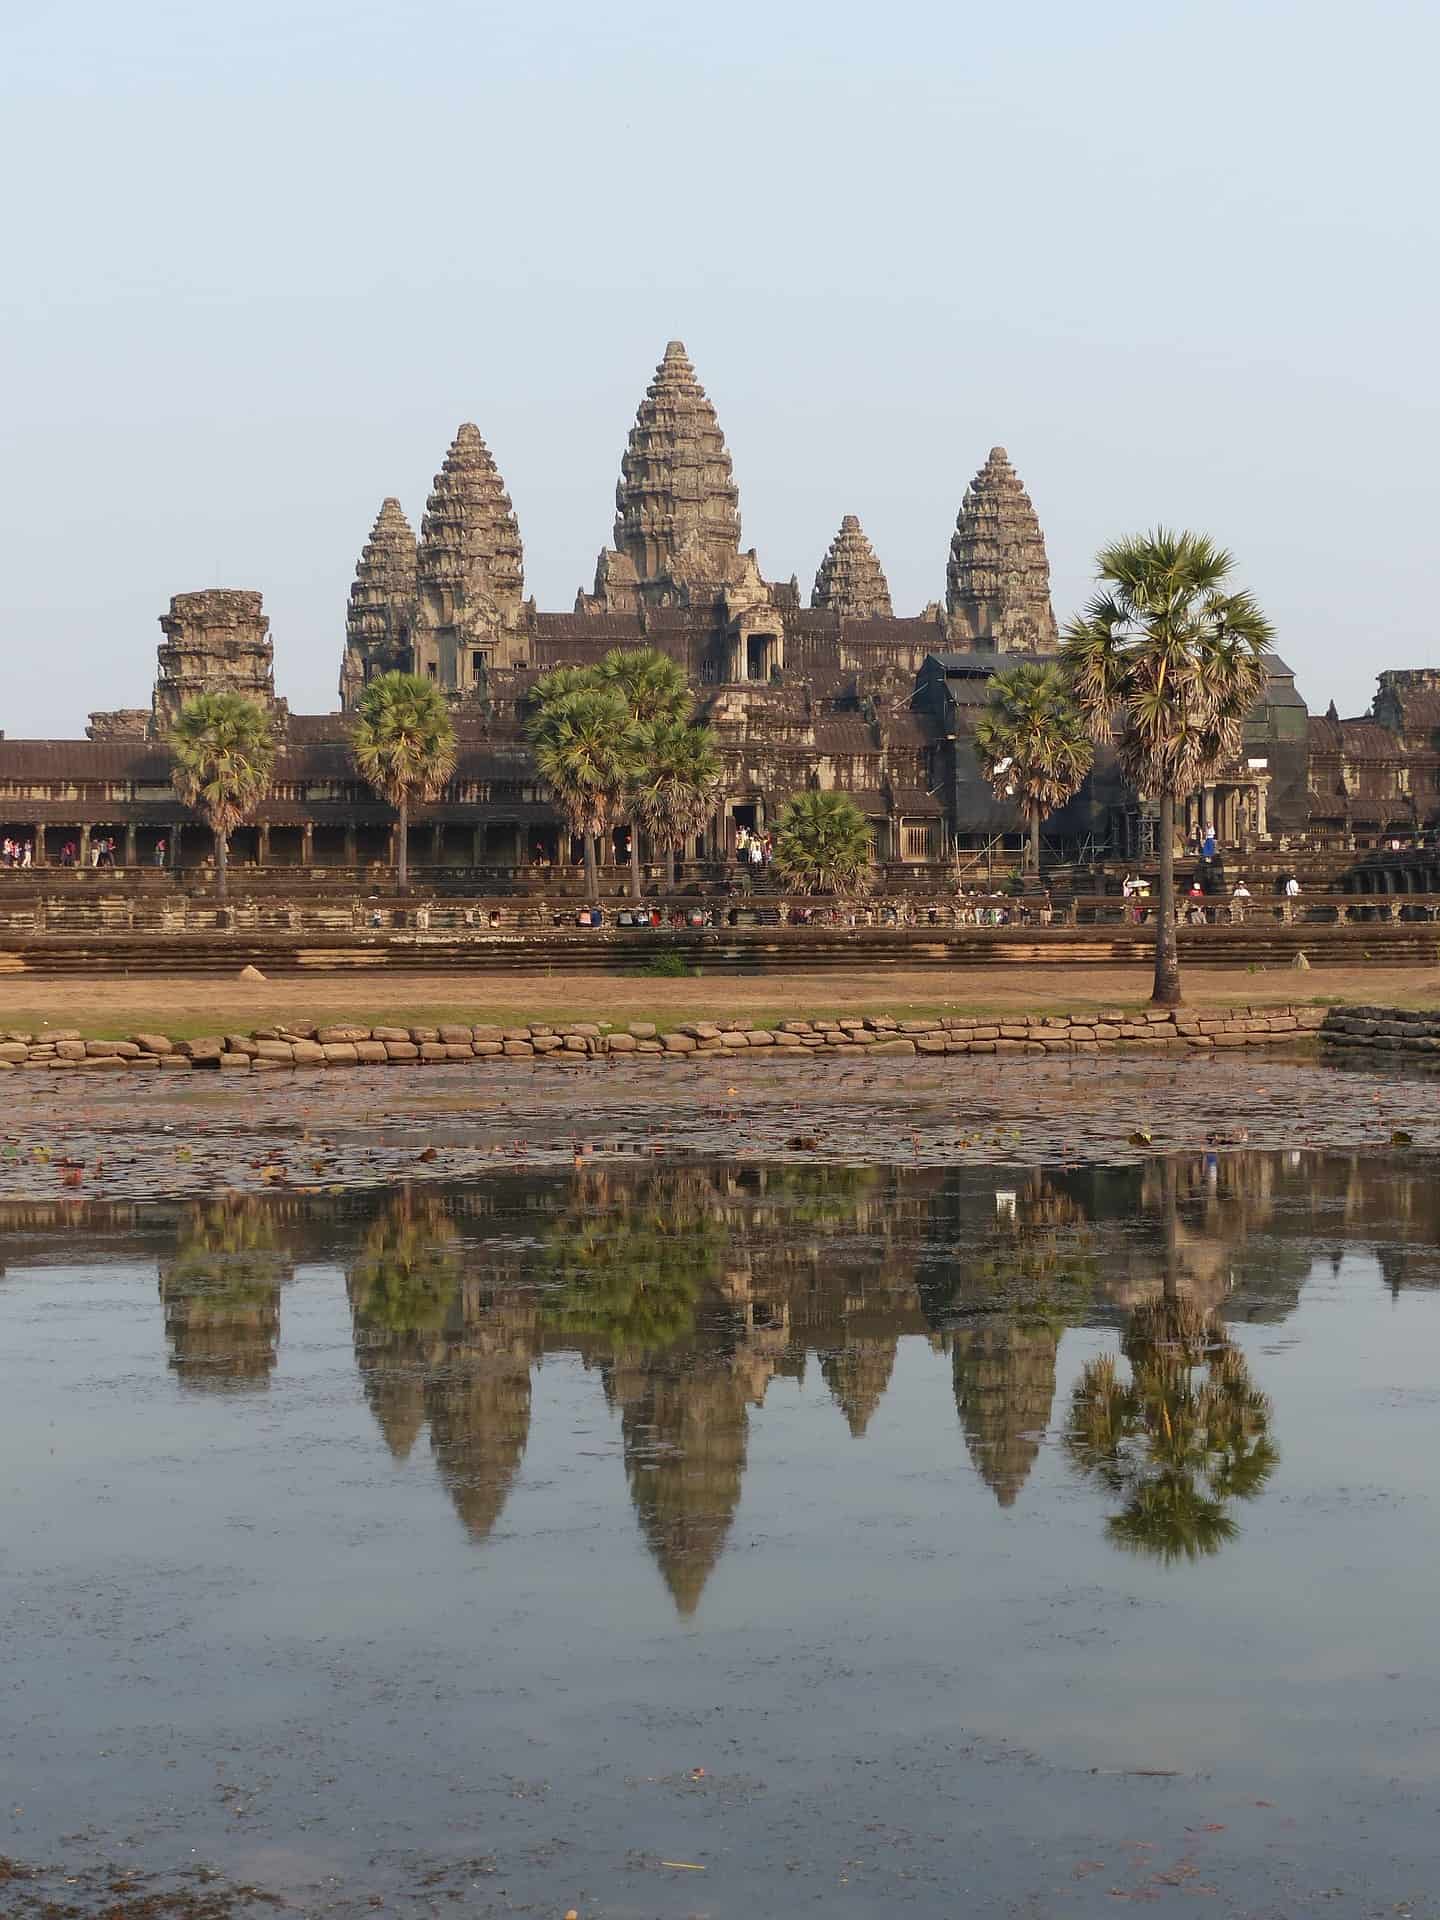 Angkor Wat viewed from across the pond at the main entrance